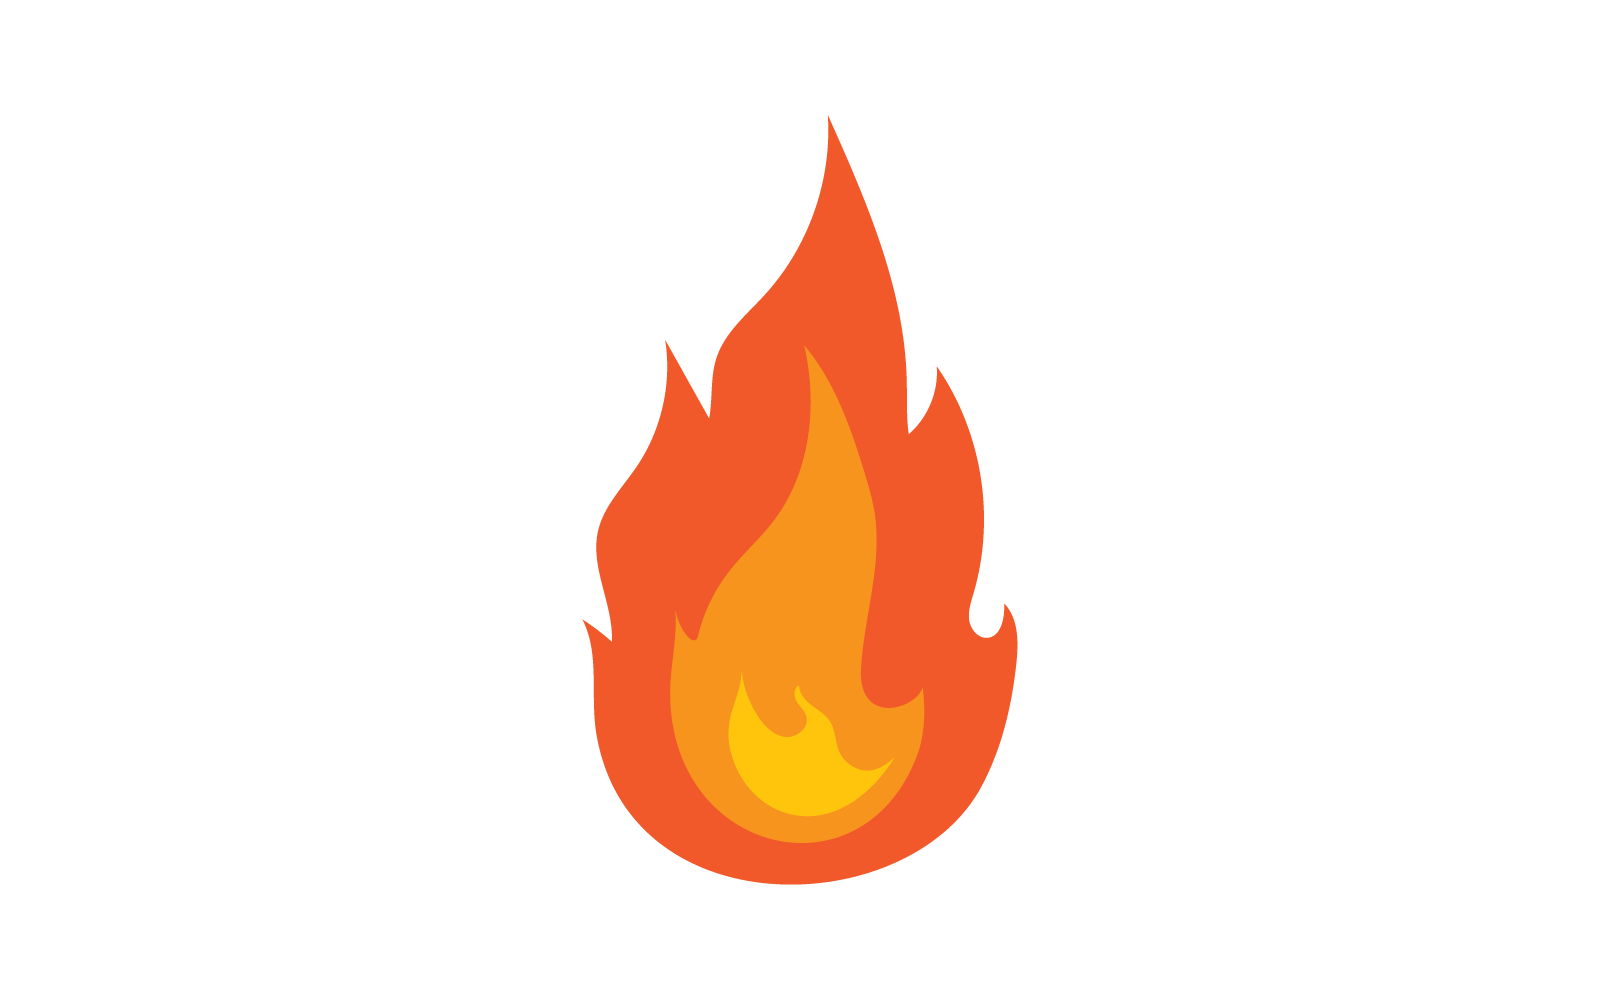 Fire flame , Oil, gas and energy logo concept